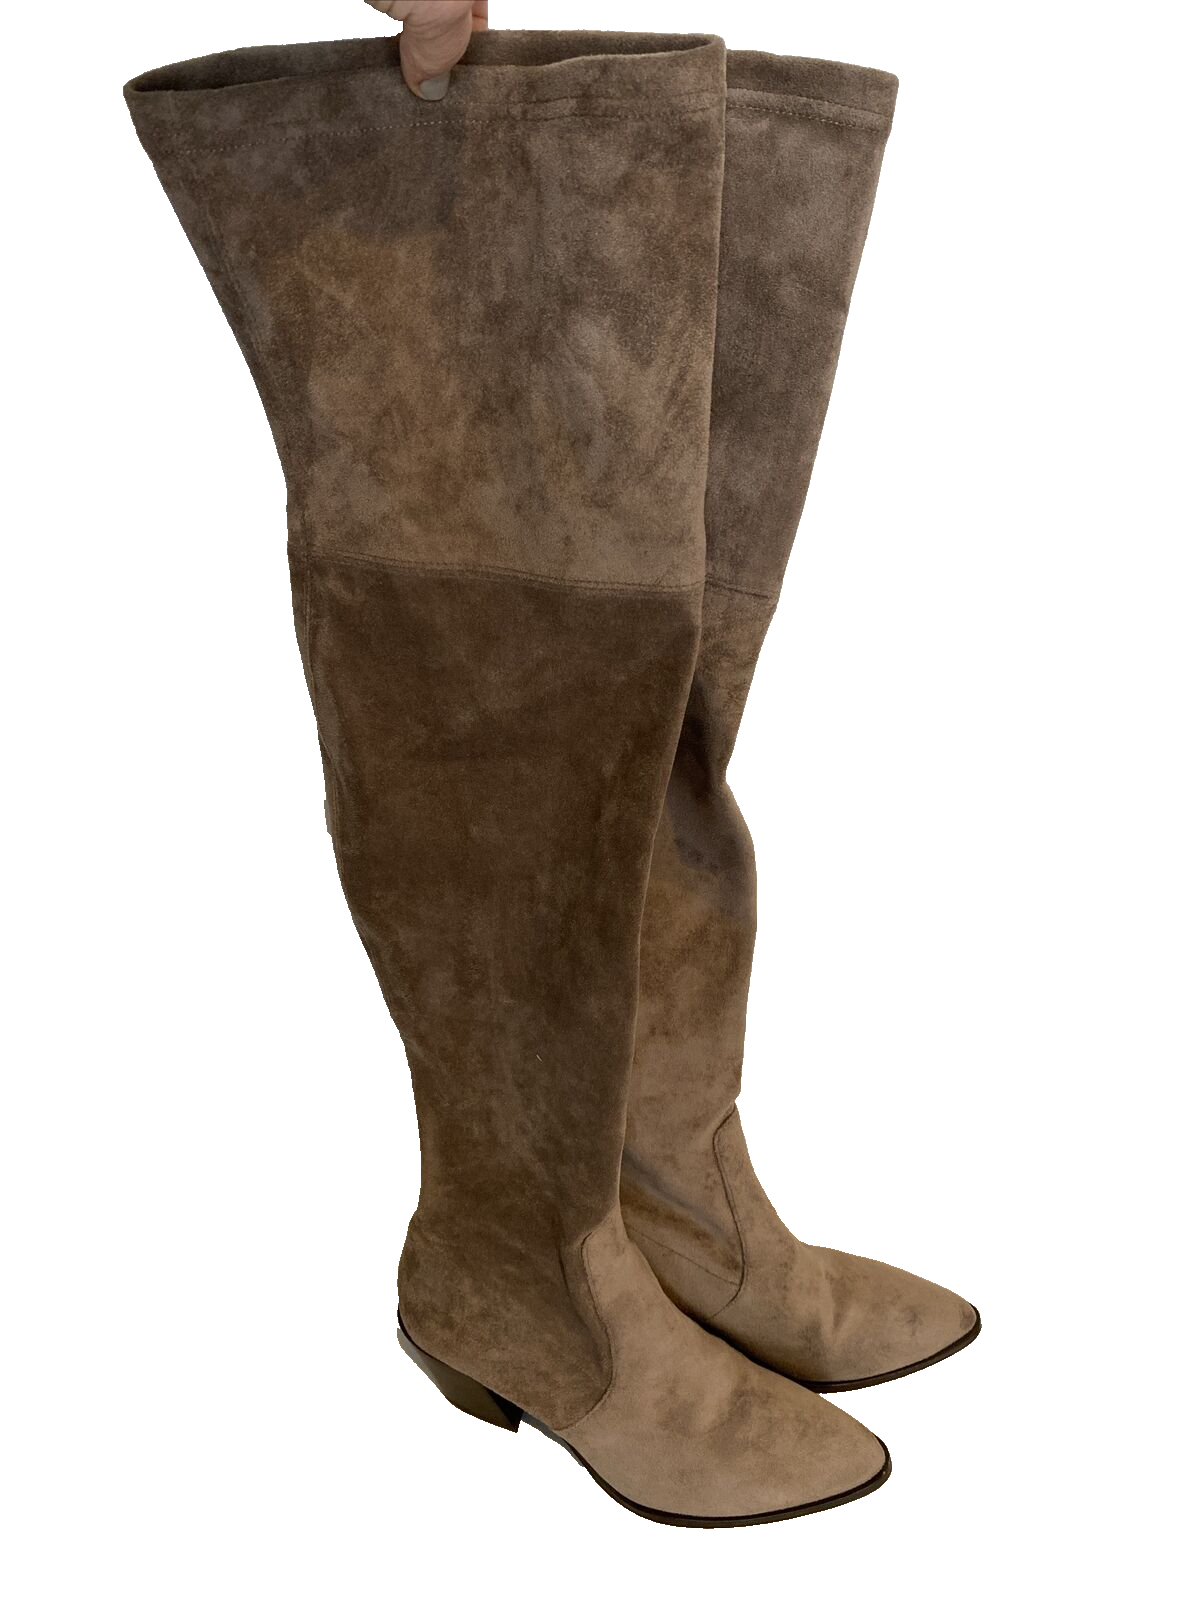 Primary image for Thursday Boot Co. Women's Over-the-Knee Faux Suede Boots Light Brown Size 10